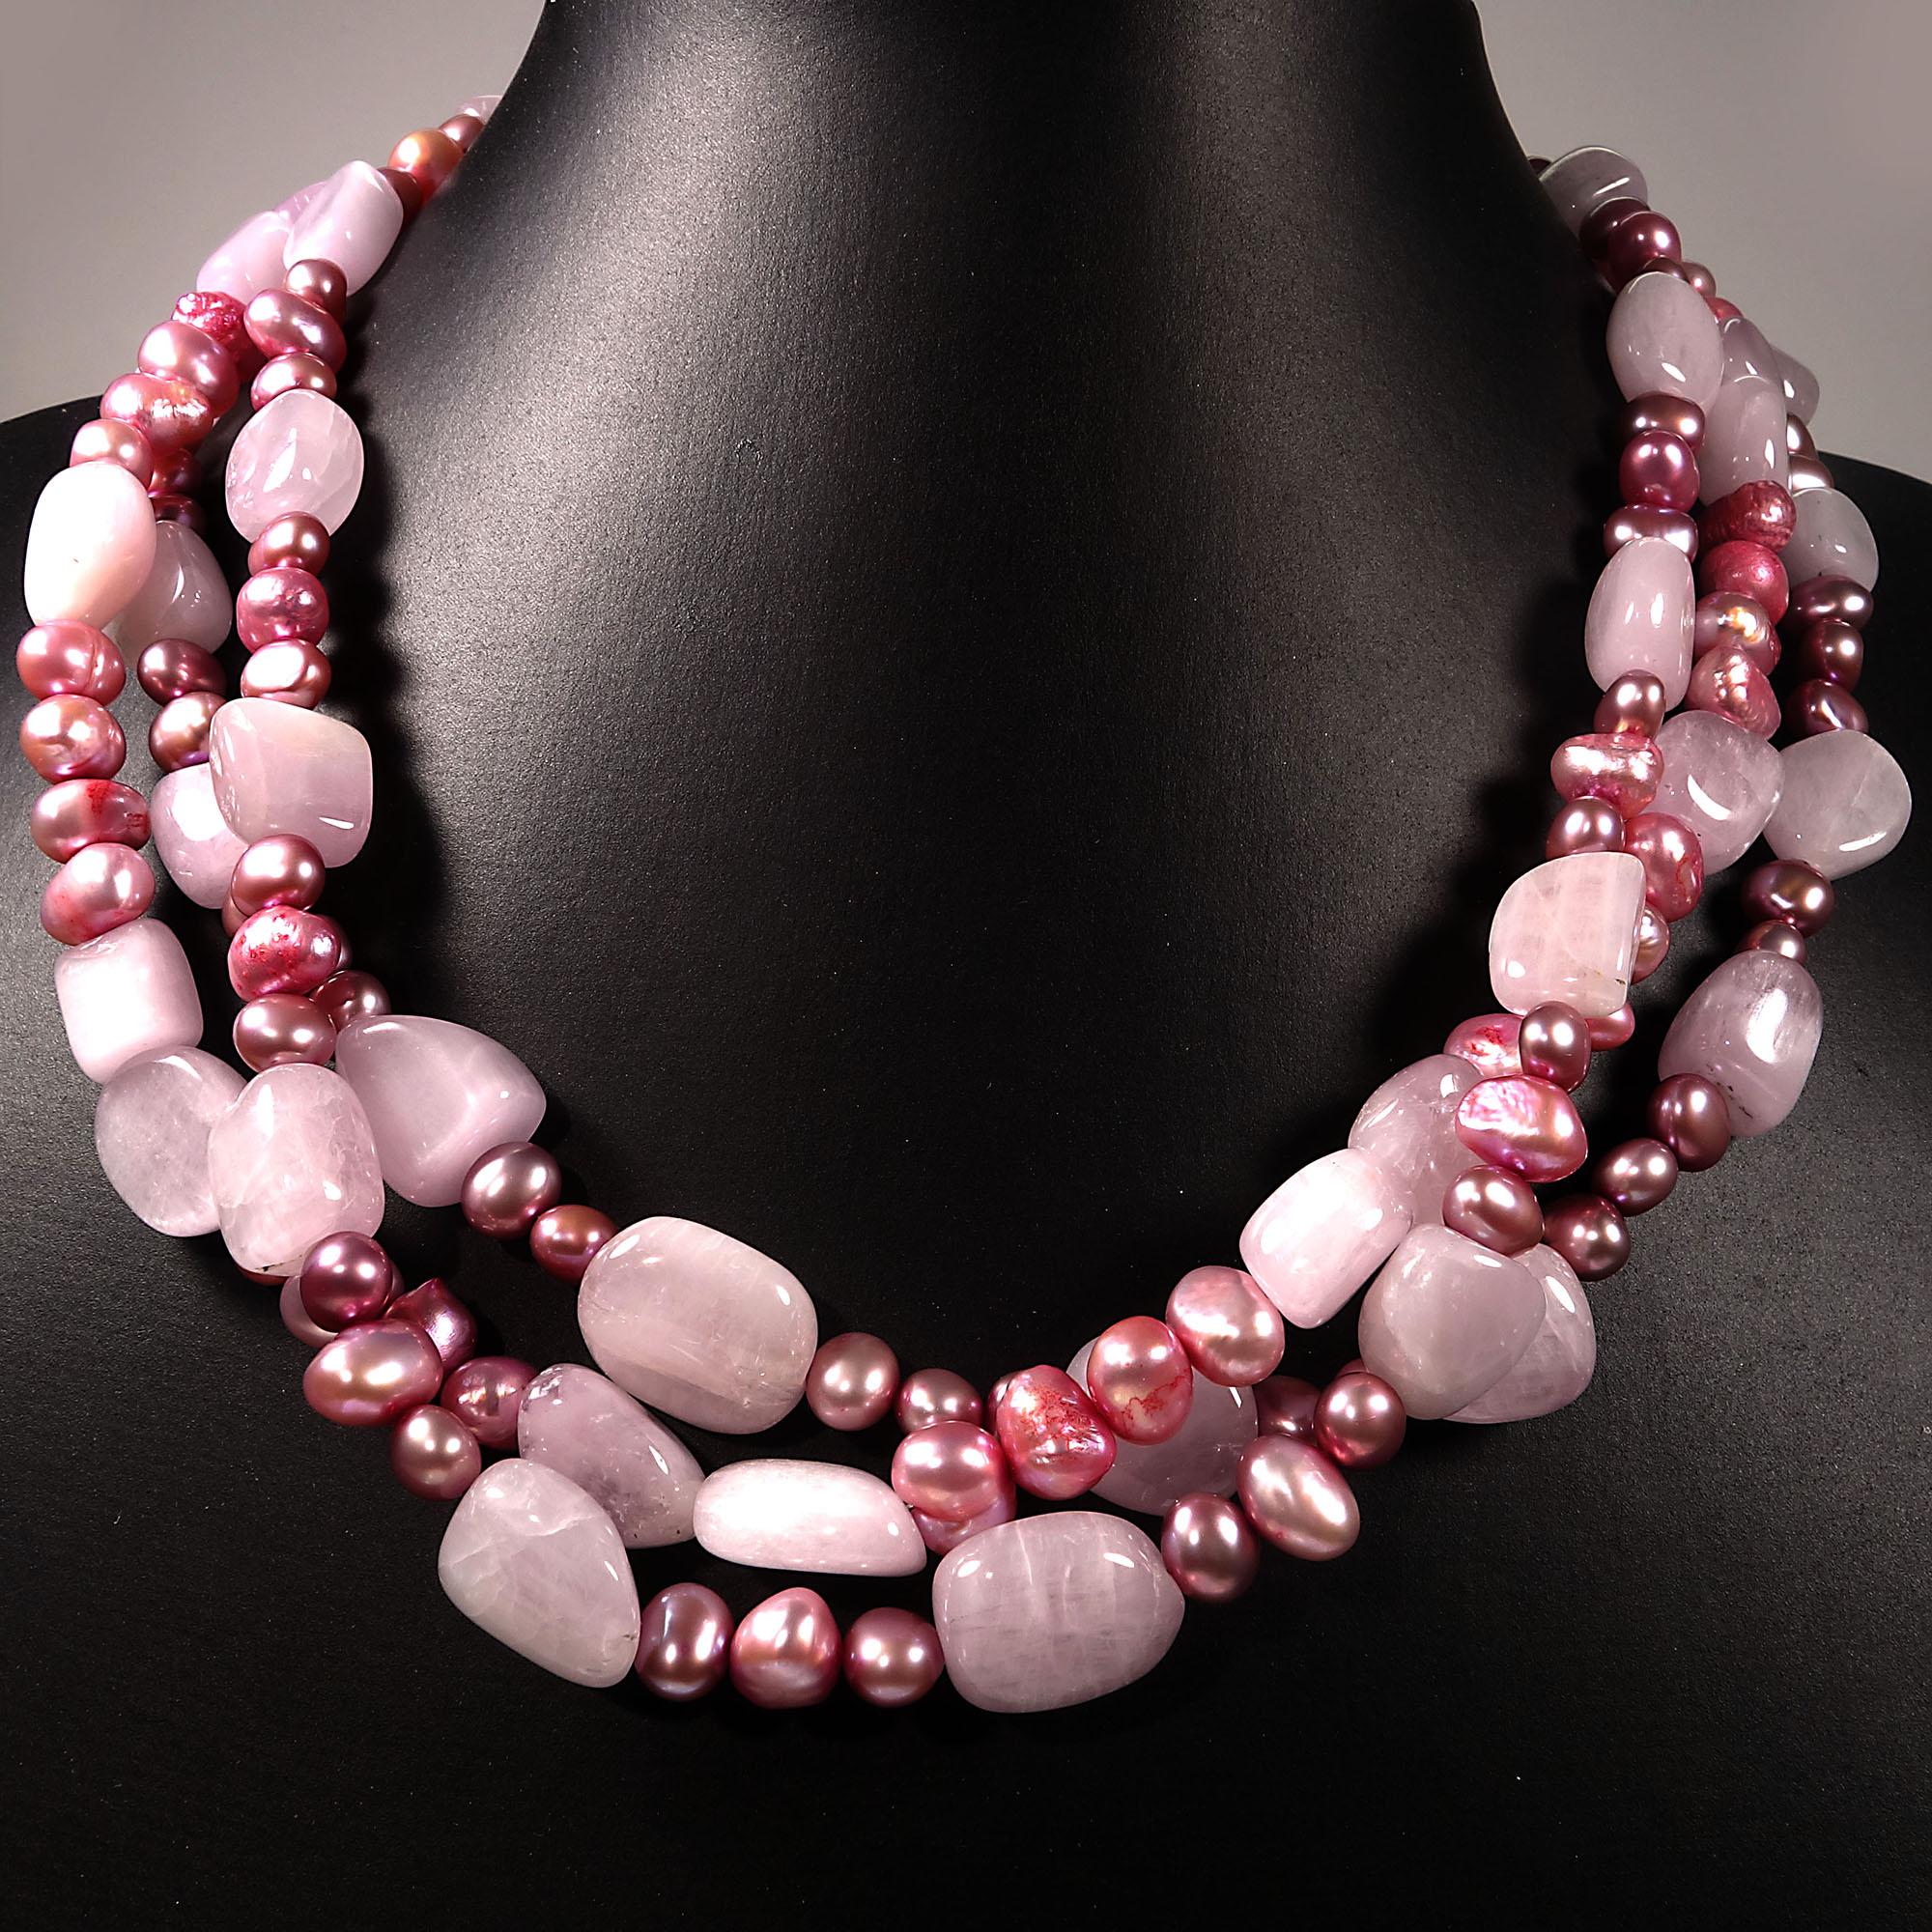 Elegant, handmade three strand necklace of highly polished pink Kunzite nuggets and pink pearls.  Each strand is designed differently. This unique 17 inch necklace is secured with a large white baroque pearl with sterling silver hooks.  The pearls